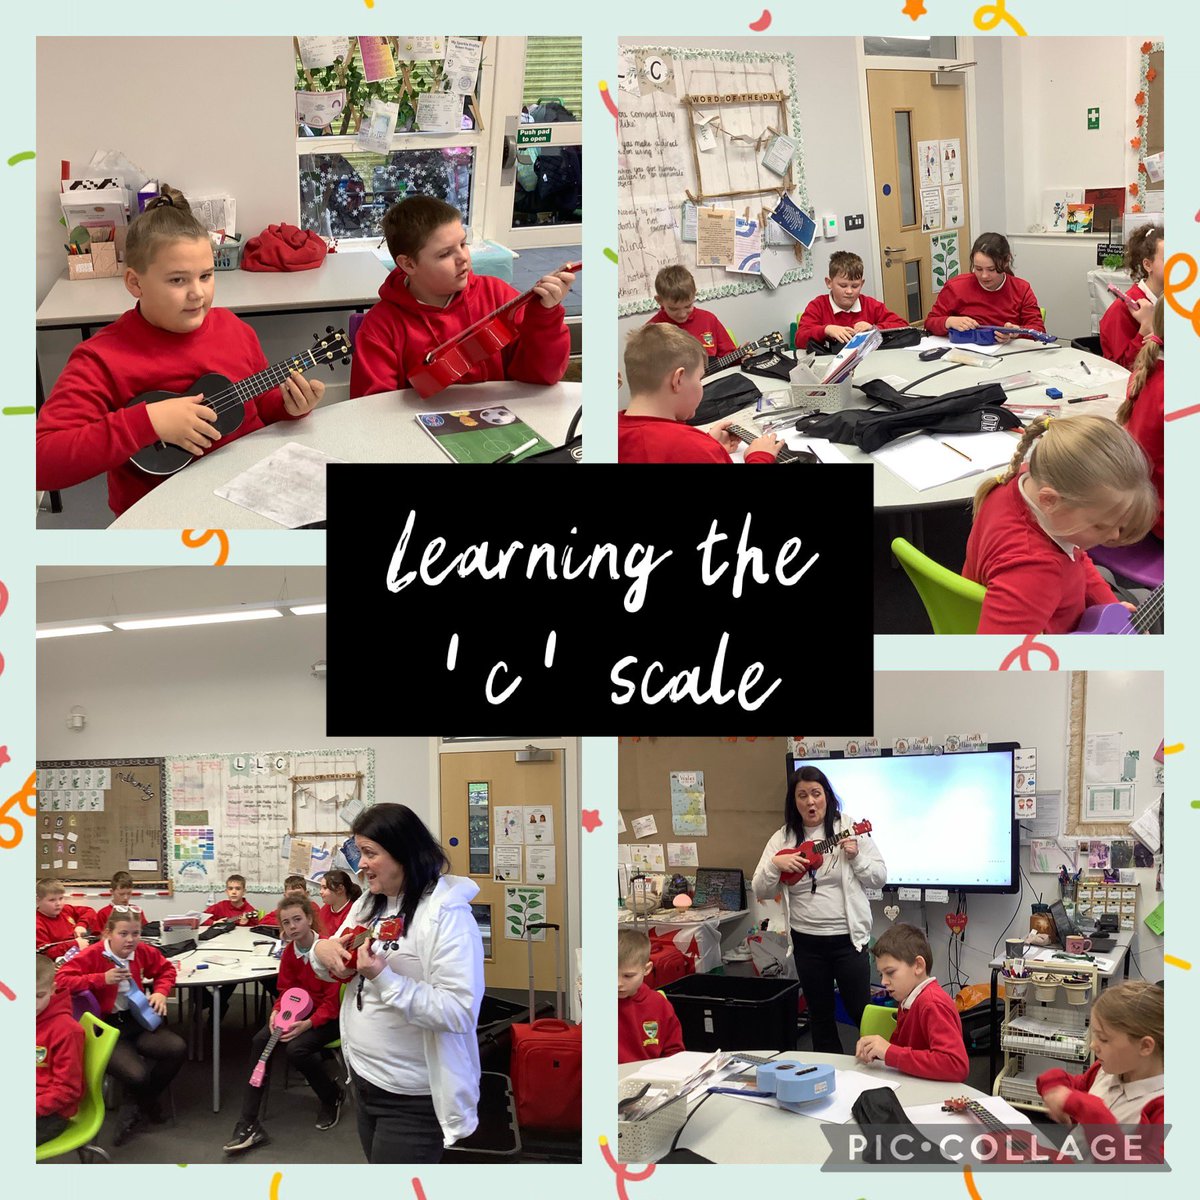 What a treat for dosbarth 12 bore yma! A session with DJ Suzi learning the c scale on the ukuleles. We are ambitious, capable learners! @garntegprimary @misskedwards95 @mrssroche